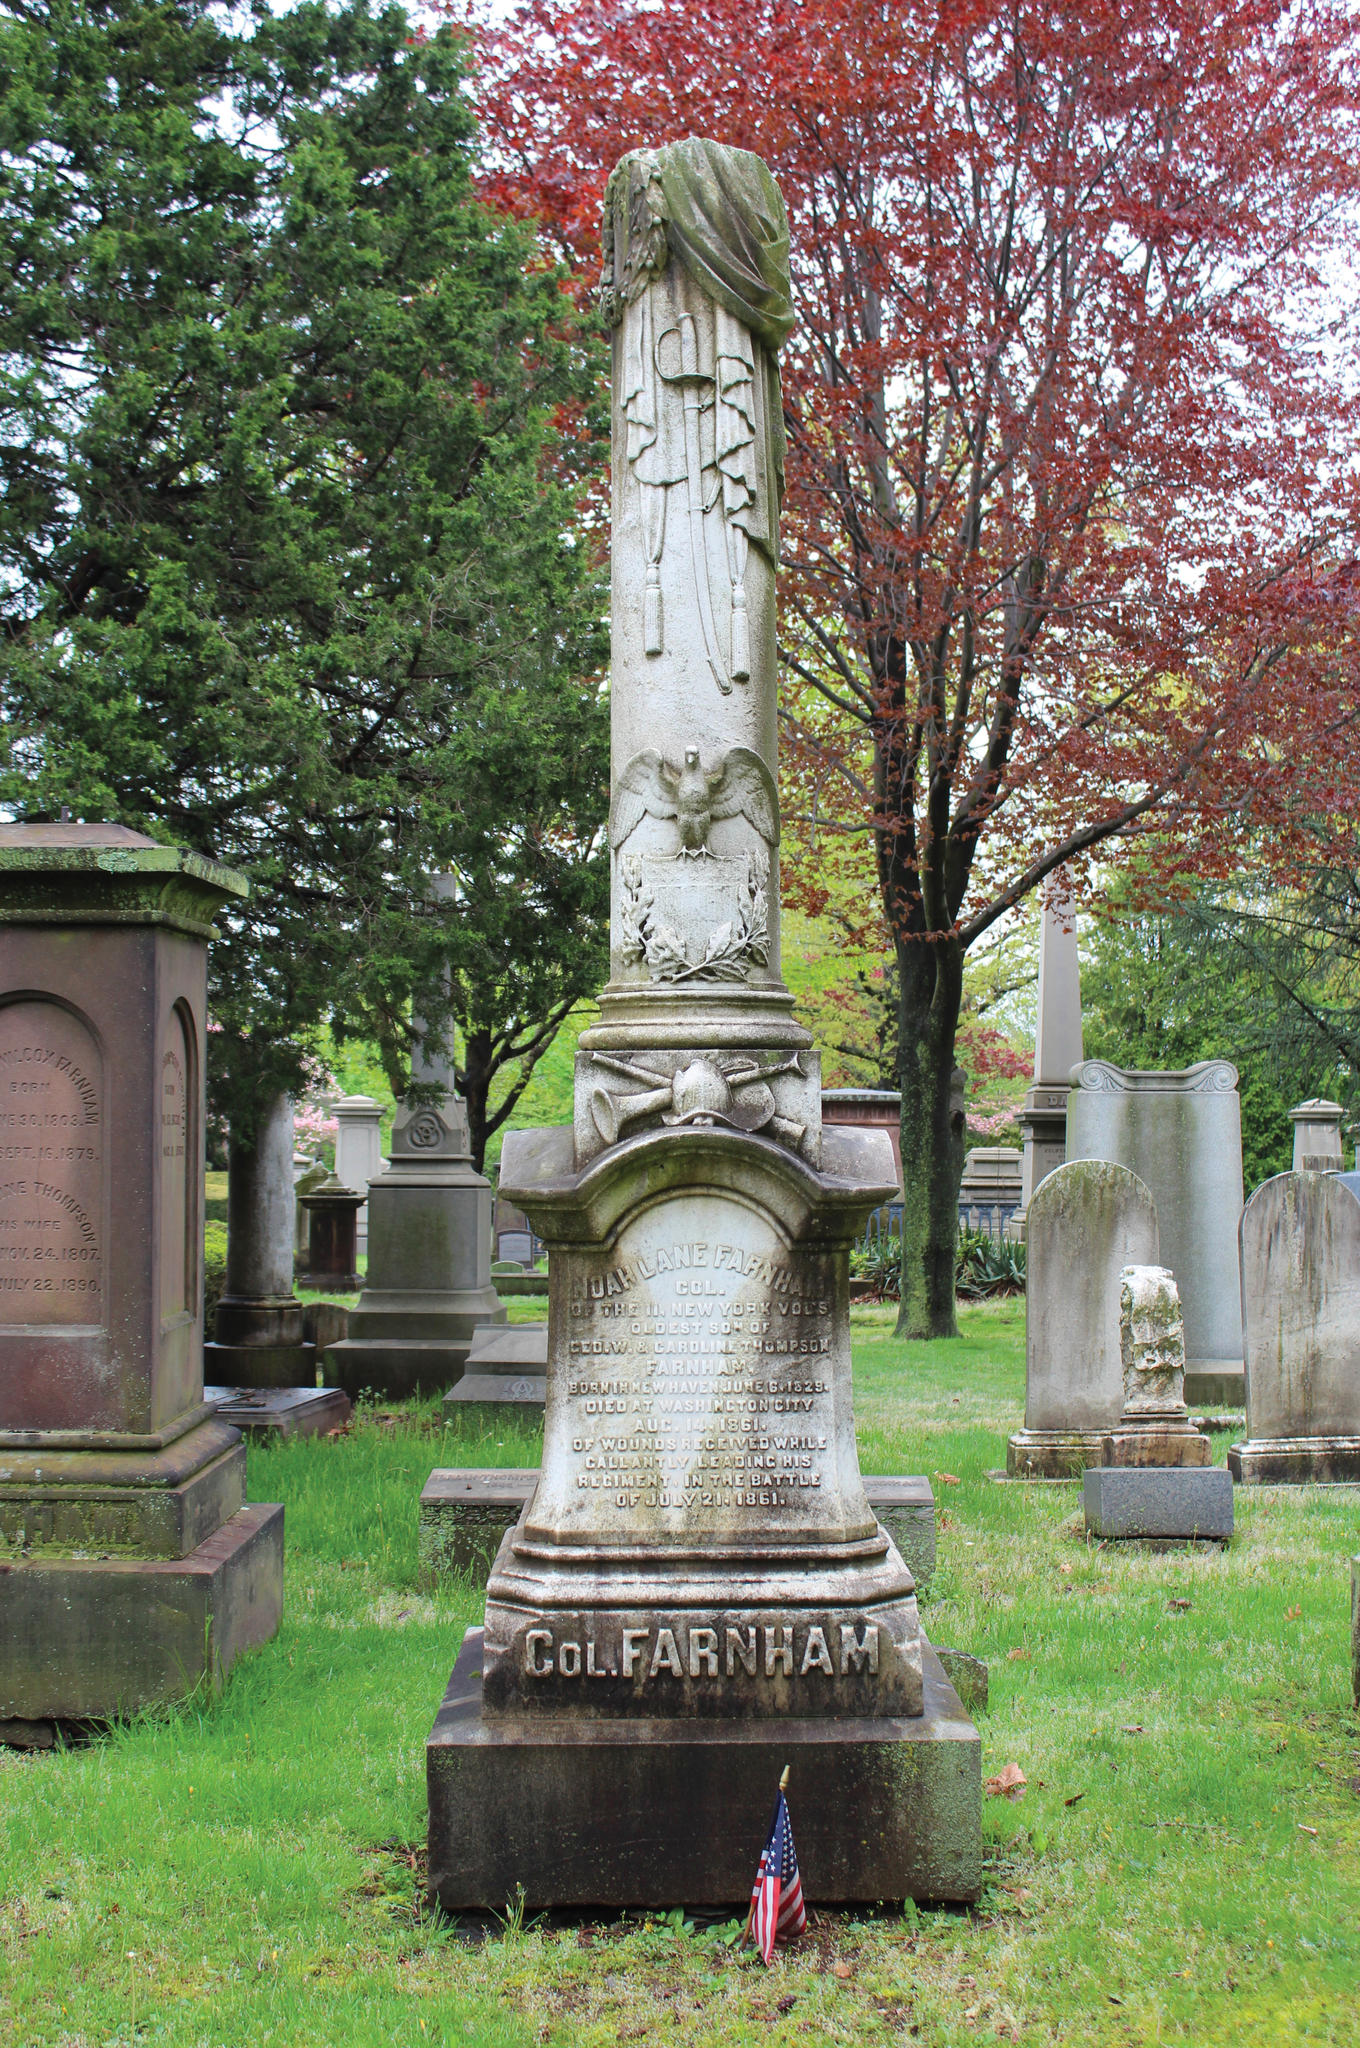 <span style="background-color:transparent">Born in New Haven. A short man (5’4”; he was nicknamed “Pony”), he enlisted with the New York 7th Regiment known as the Fire Zouaves in May of 1861. When its commander was killed that same month, Farnham was appointed Colonel. He was killed at the first Battle of Bull Run on July 21,1861. According to a subsequent article in </span><span style="background-color:transparent">The New York Times,</span><span style="background-color:transparent"> flags at New York City Hall, public buildings, and ships in the harbor were flown at half-mast in respect to him on August 15, 1861.</span><span style="background-color:transparent"> </span><span><span style="background-color:transparent">Location: 62 Spruce</span></span> 